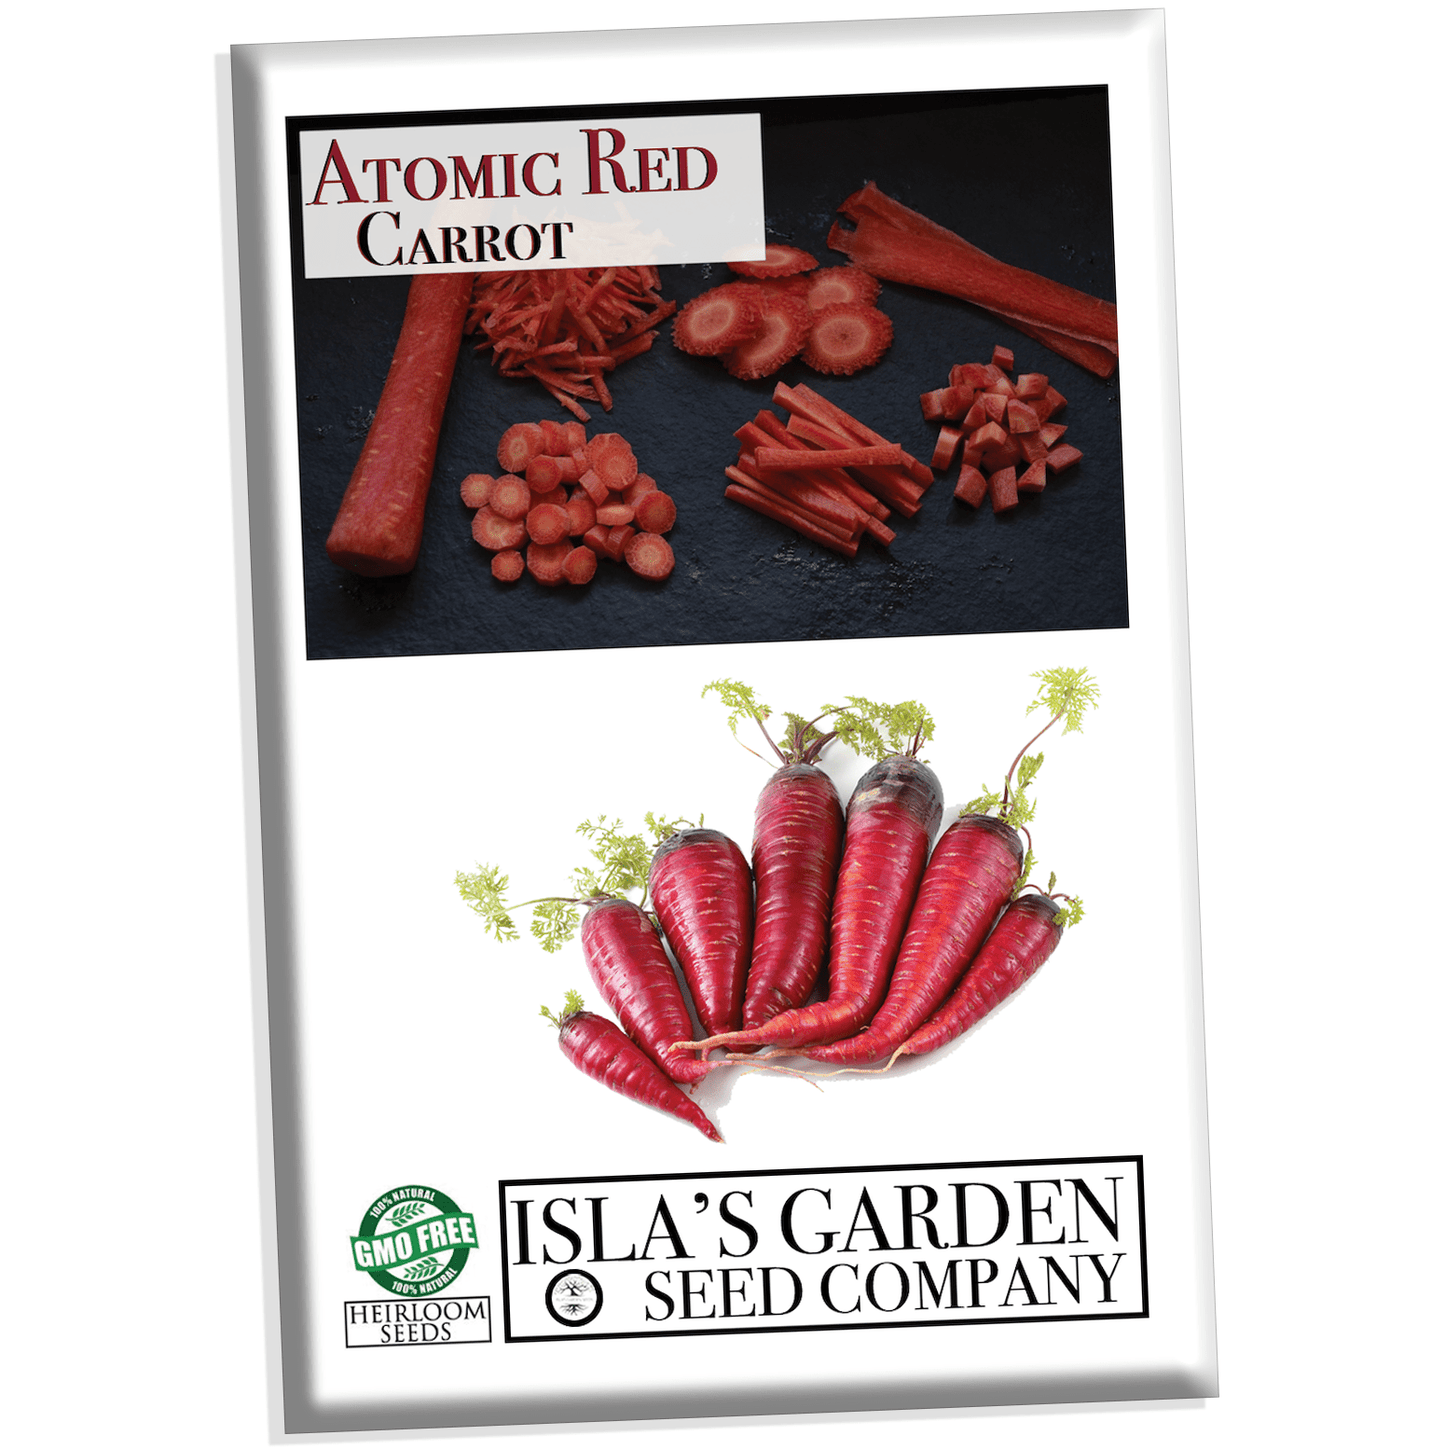 Atomic Red Carrot Seeds for Planting, 250+ Heirloom Seeds Per Packet, Isla's Garden Seeds , Non GMO Seeds, Botanical Name: Daucus Carrota, Great Home Garden Gift